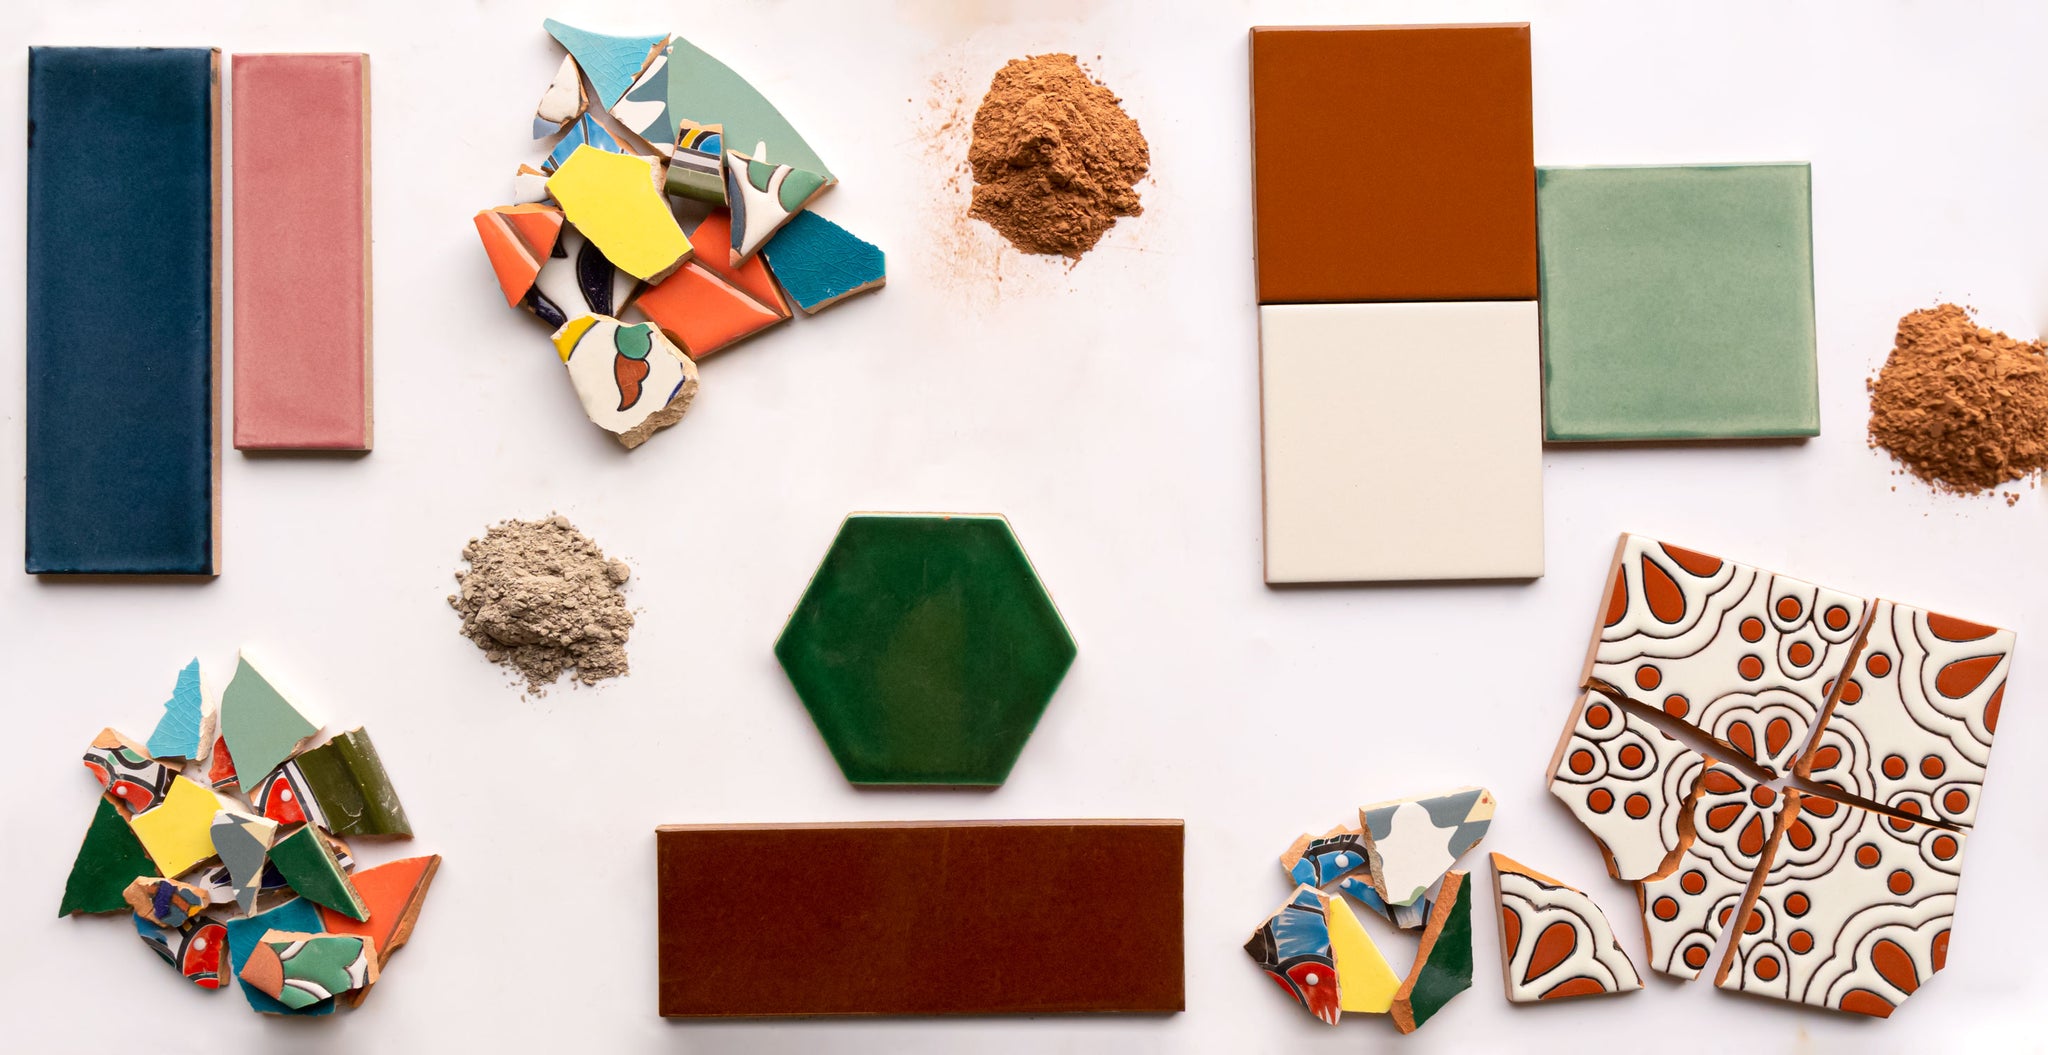 Recycled tiles by Clay Imports